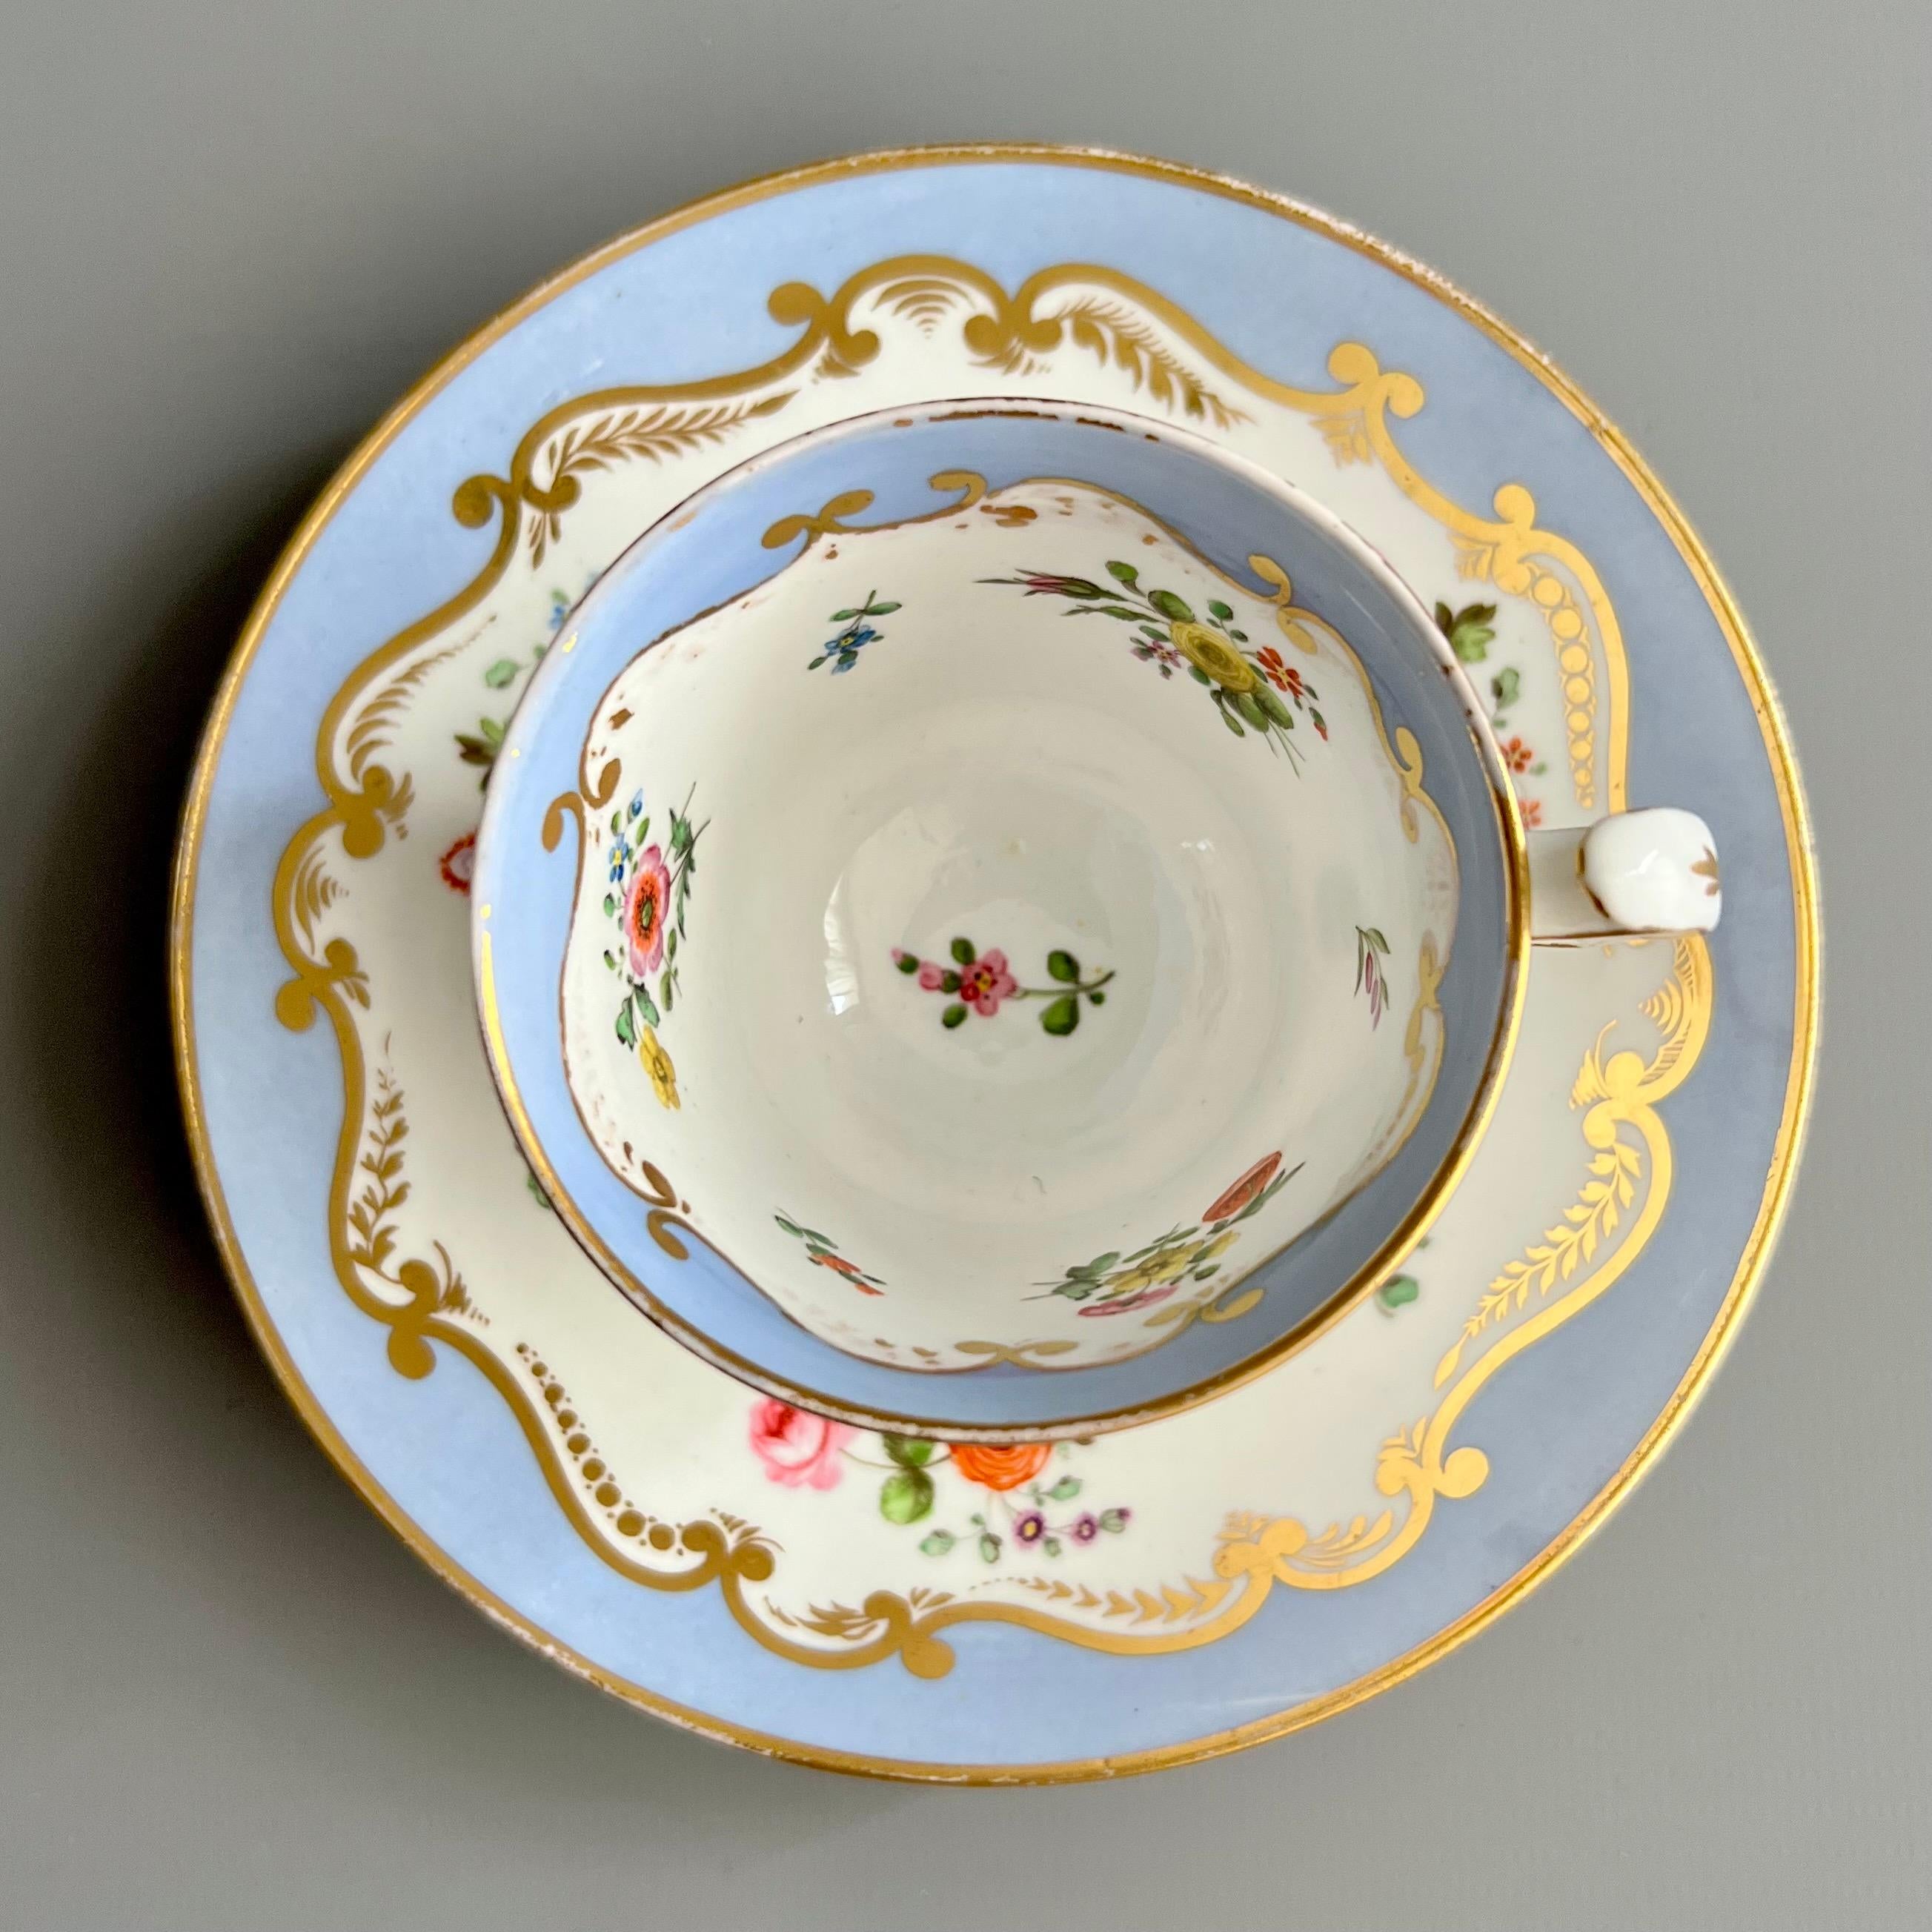 Early 19th Century Spode Porcelain Teacup Trio, Lavender Blue with Flower Sprays, Regency ca 1815 For Sale